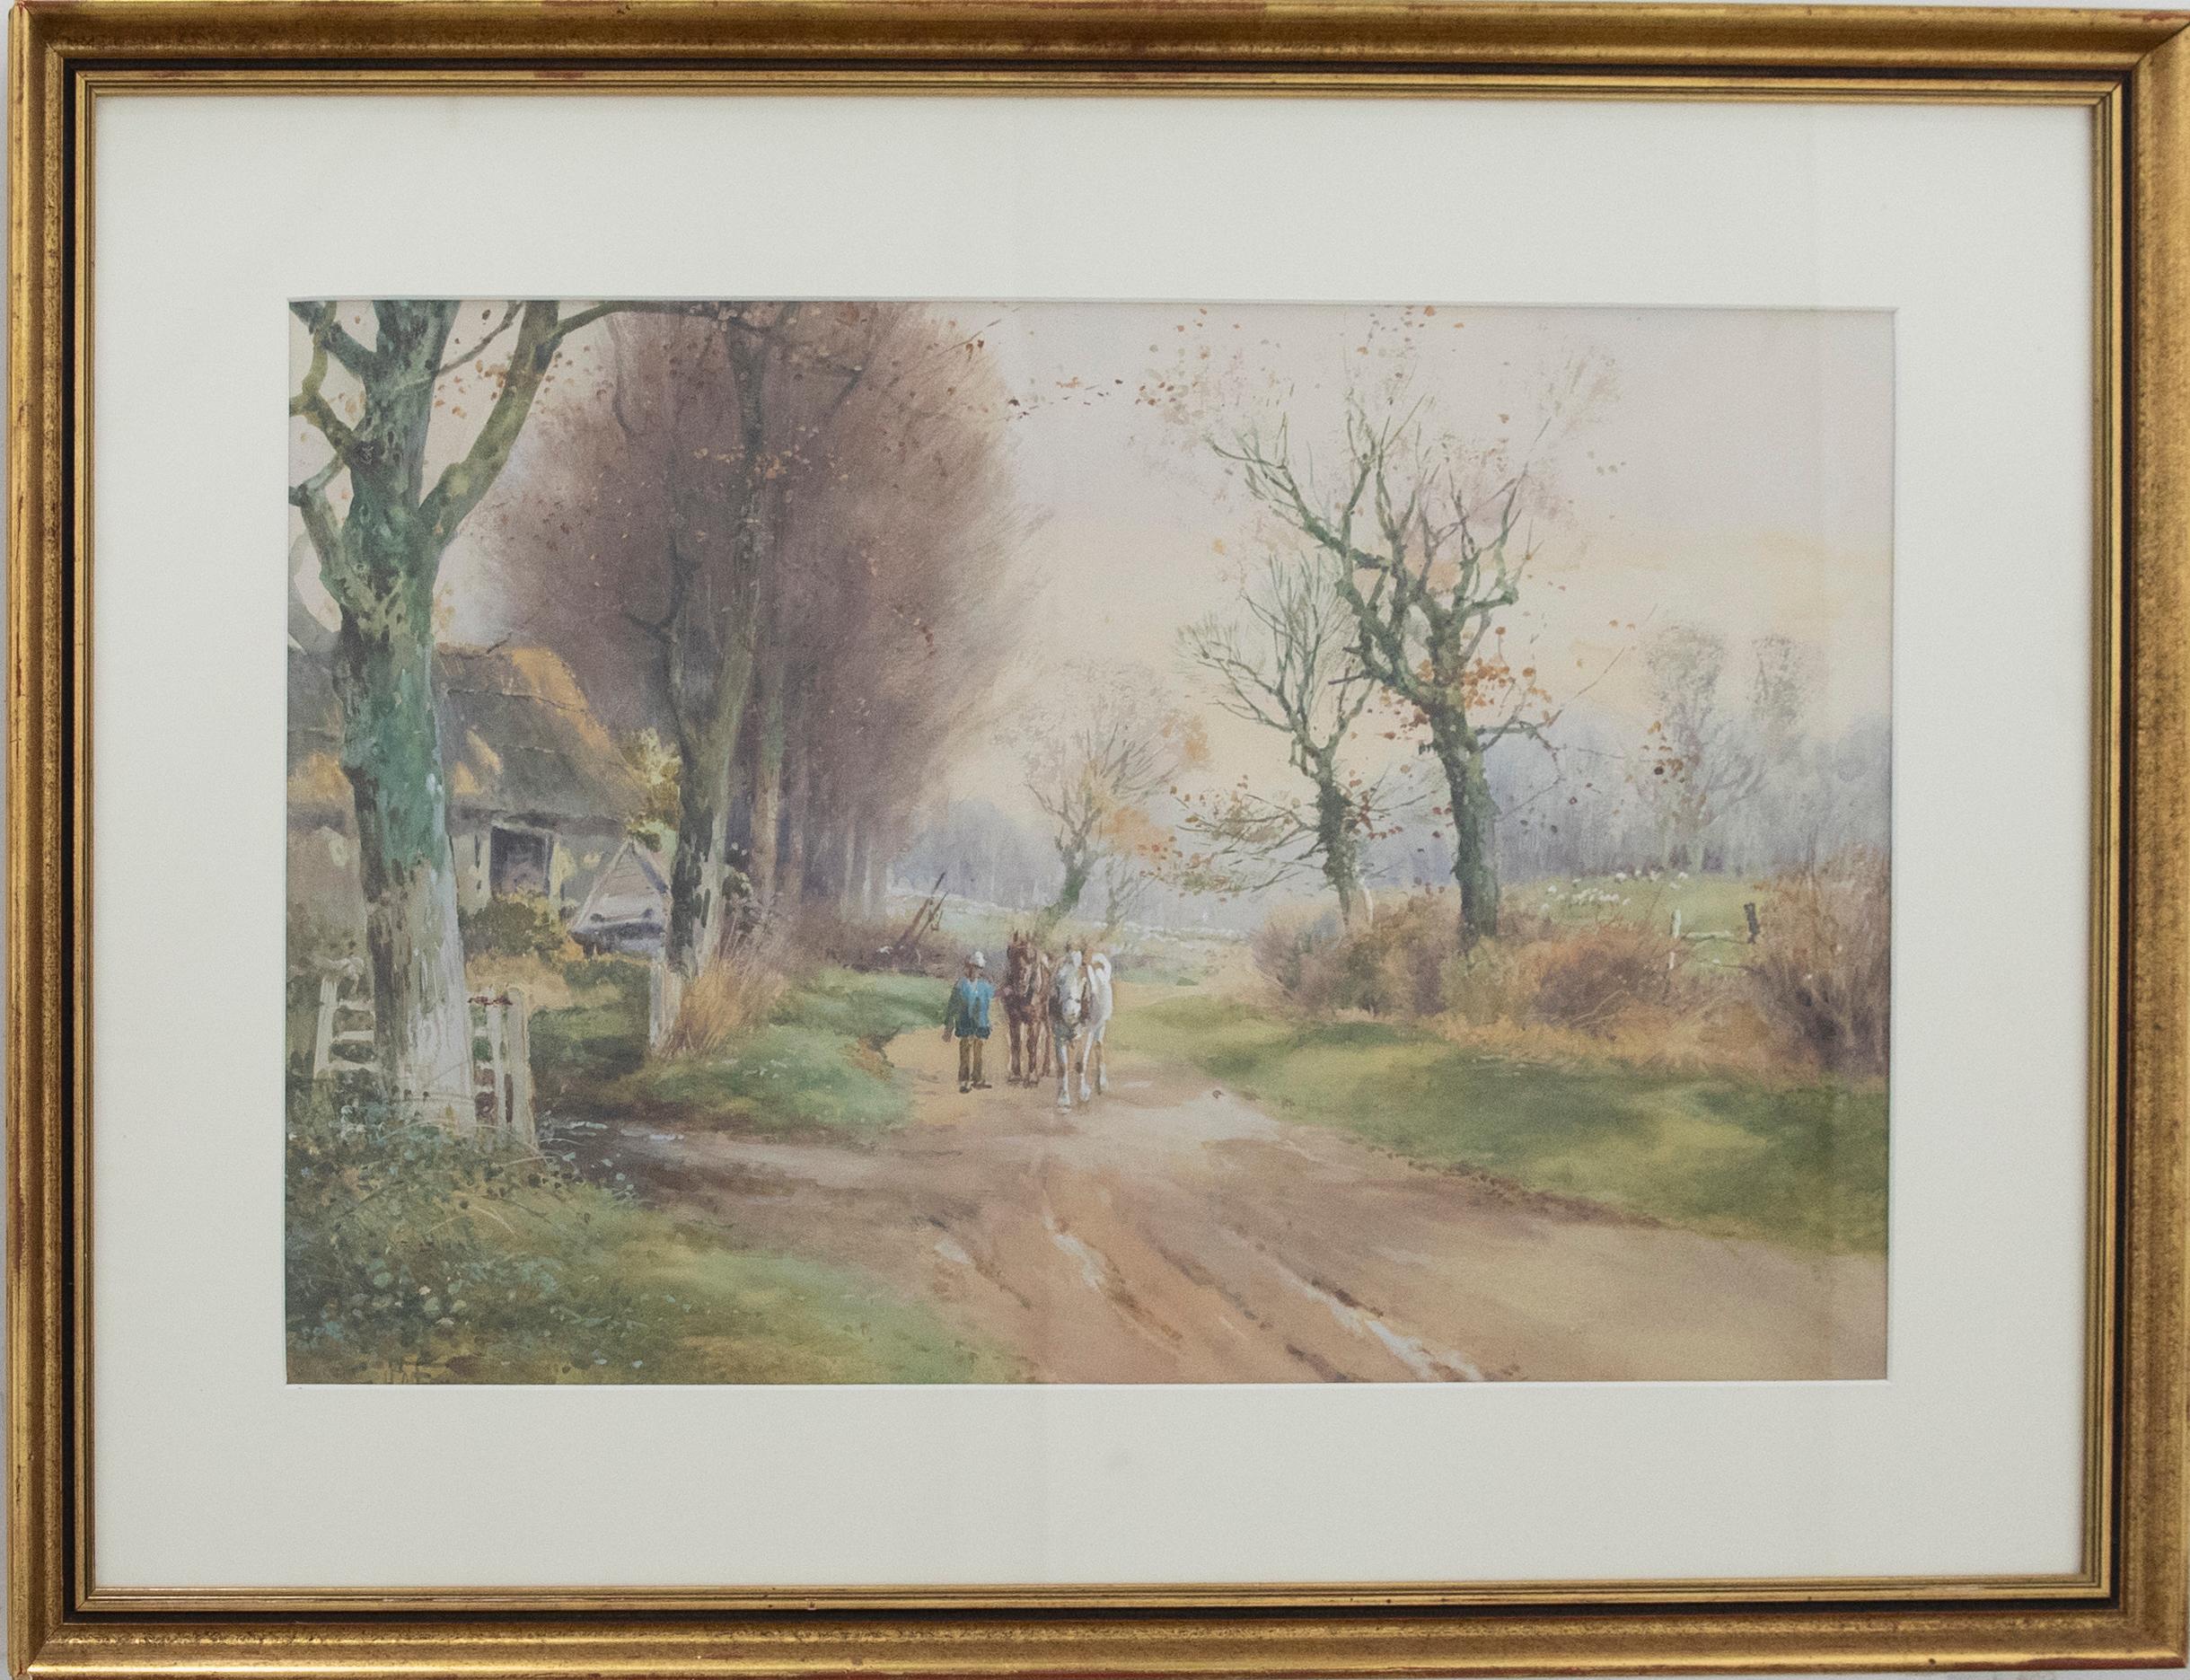 A fine turn of the century watercolour by Henry Charles Fox (1855-1929), depicting a farmer walking his two horses along a country lane. The man looks to be returning to the yard only a few steps away, with his beautiful grey leading the way. The